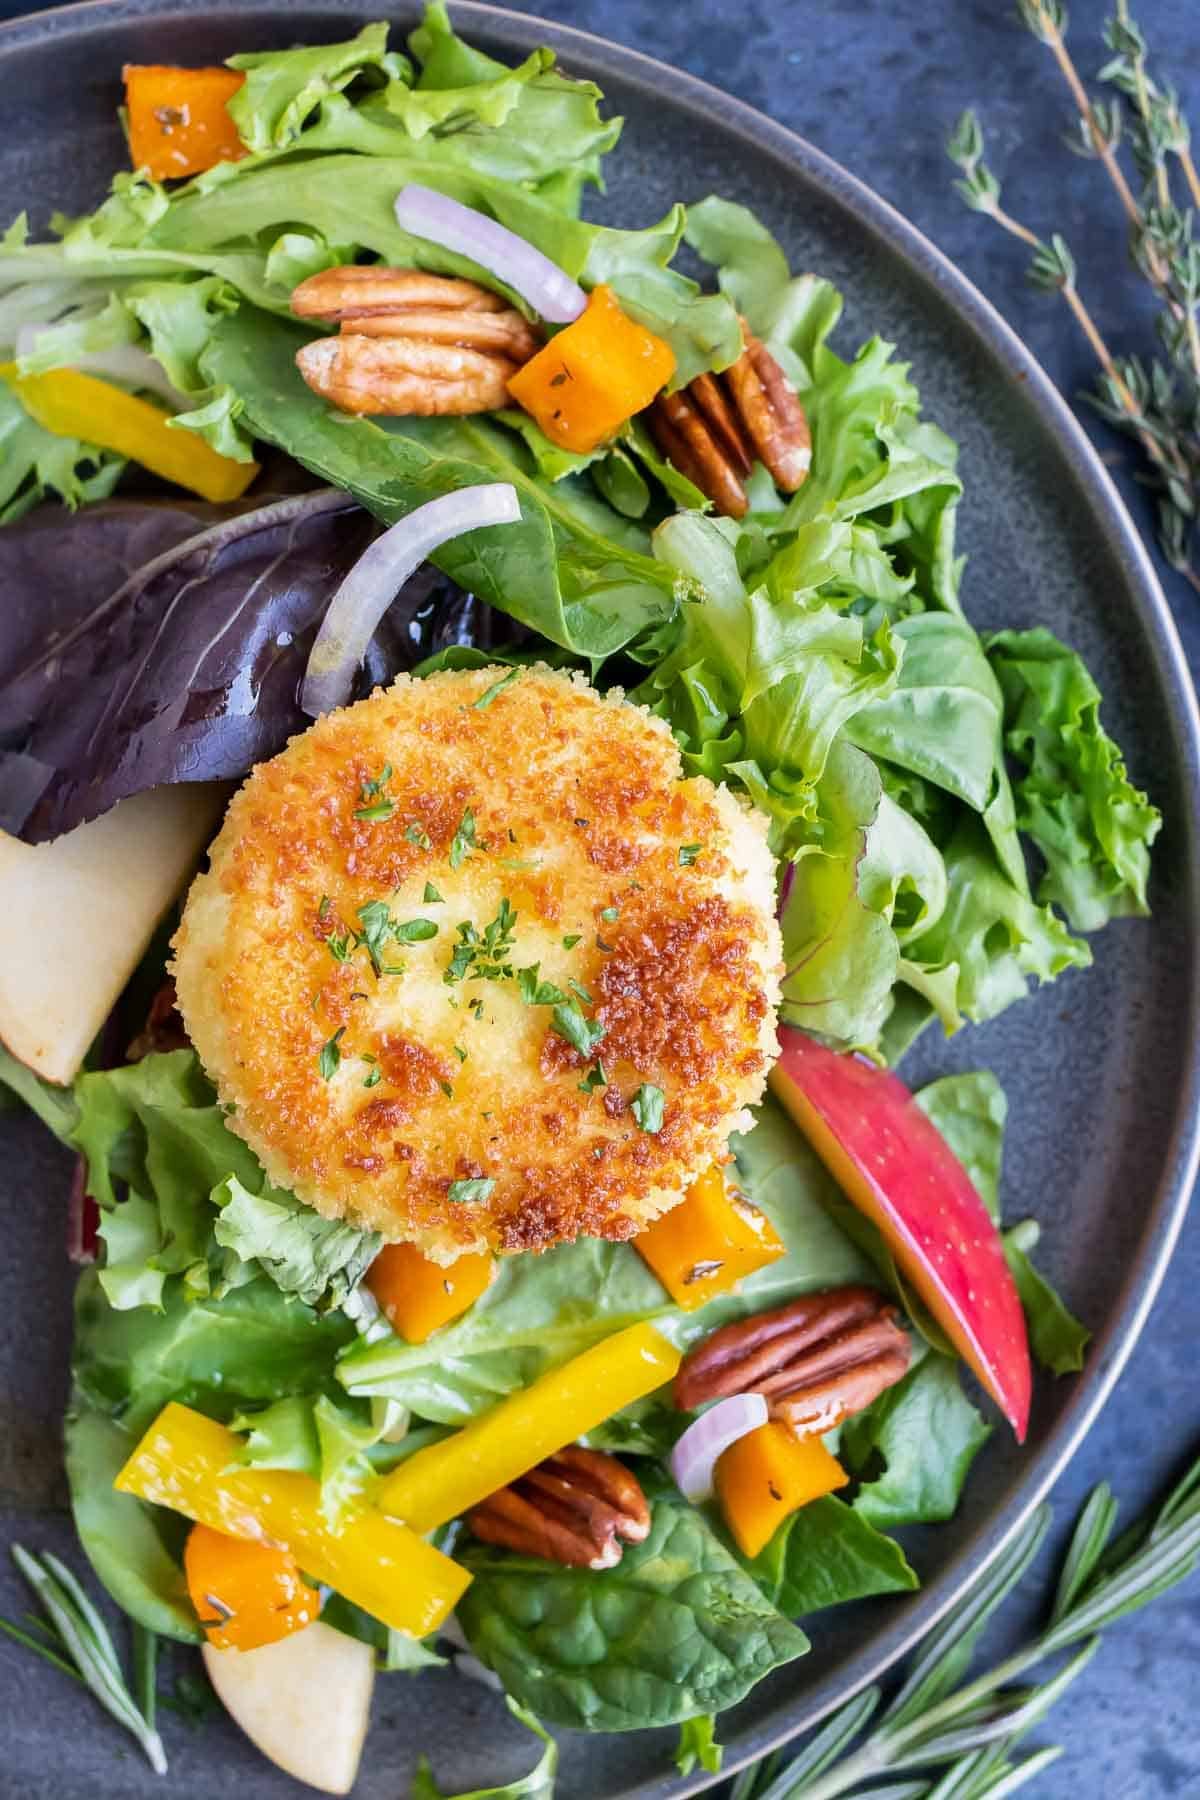 A Fall harvest salad with apples and a fried goat cheese ball on top.